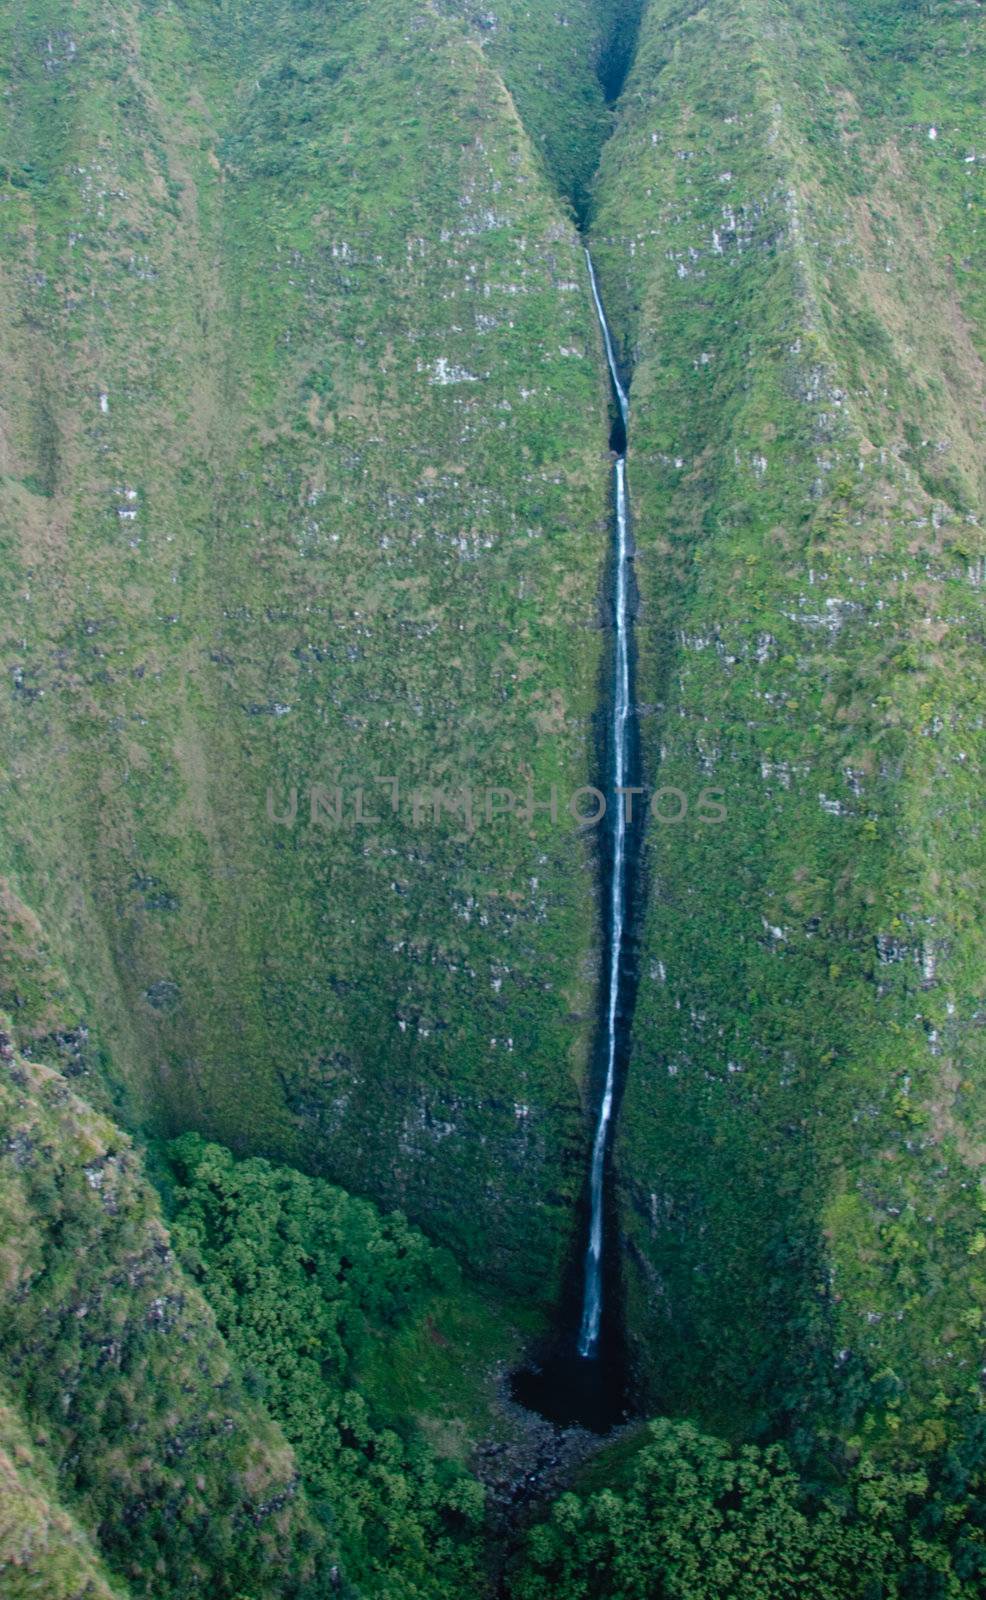 Waterfall in the mountains of Kauai by steheap